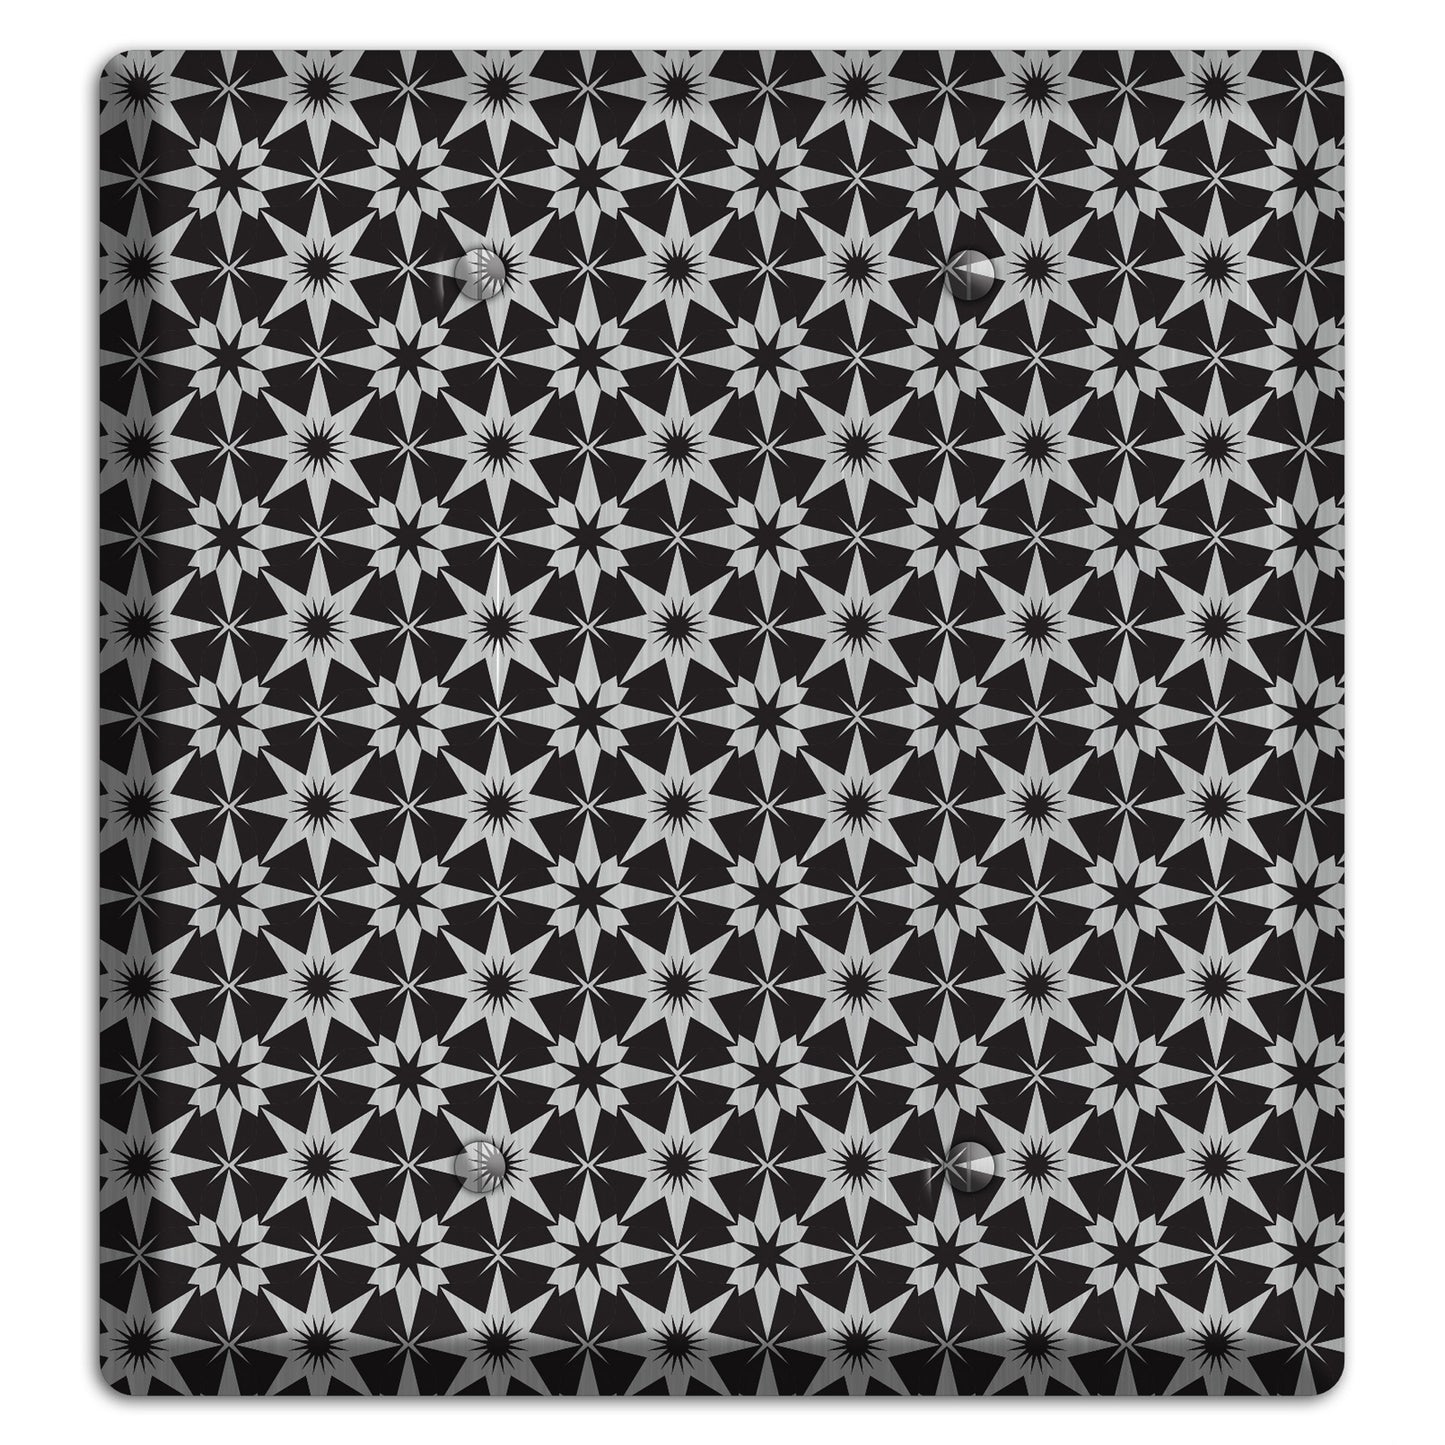 Black with Stainless Foulard 2 Blank Wallplate